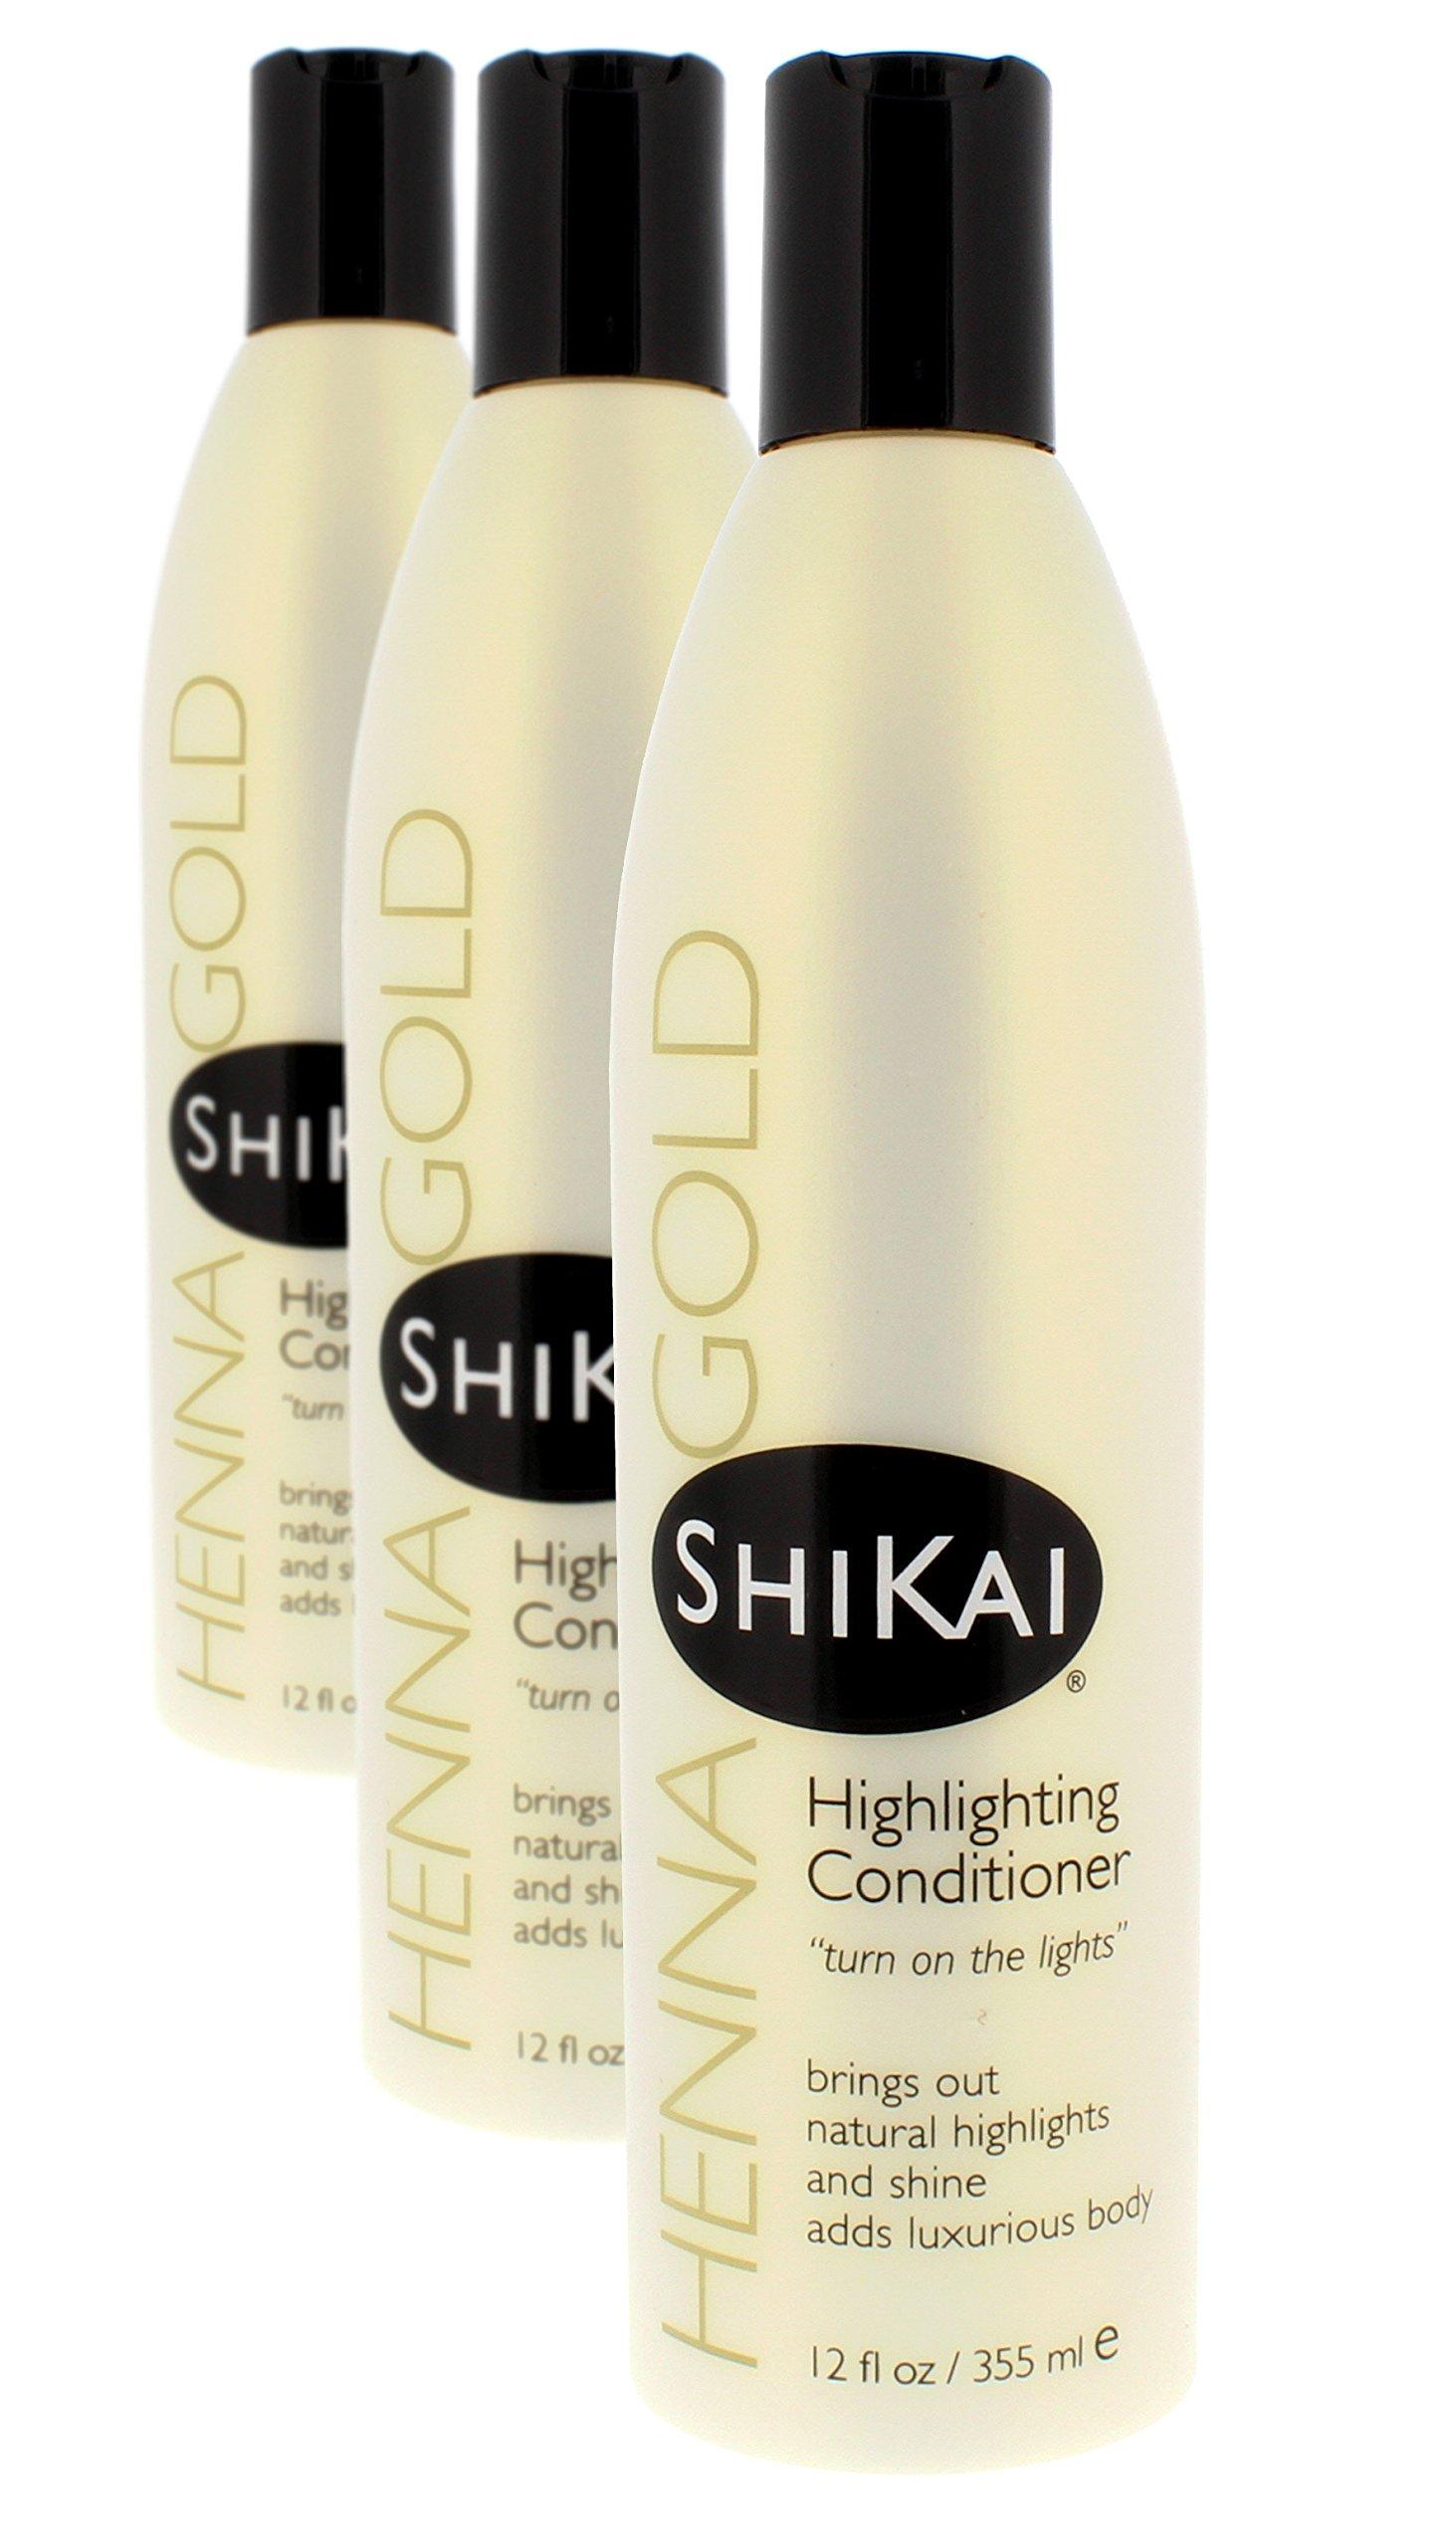 Shikai - Henna Gold Highlighting Conditioner, Brings Out Natural Highlights  & Shine, Adds Luxurious Body, Plant-Based Formula with Non-Coloring Henna  (Natural Fragrance, 12 fl oz, Pack of 3)